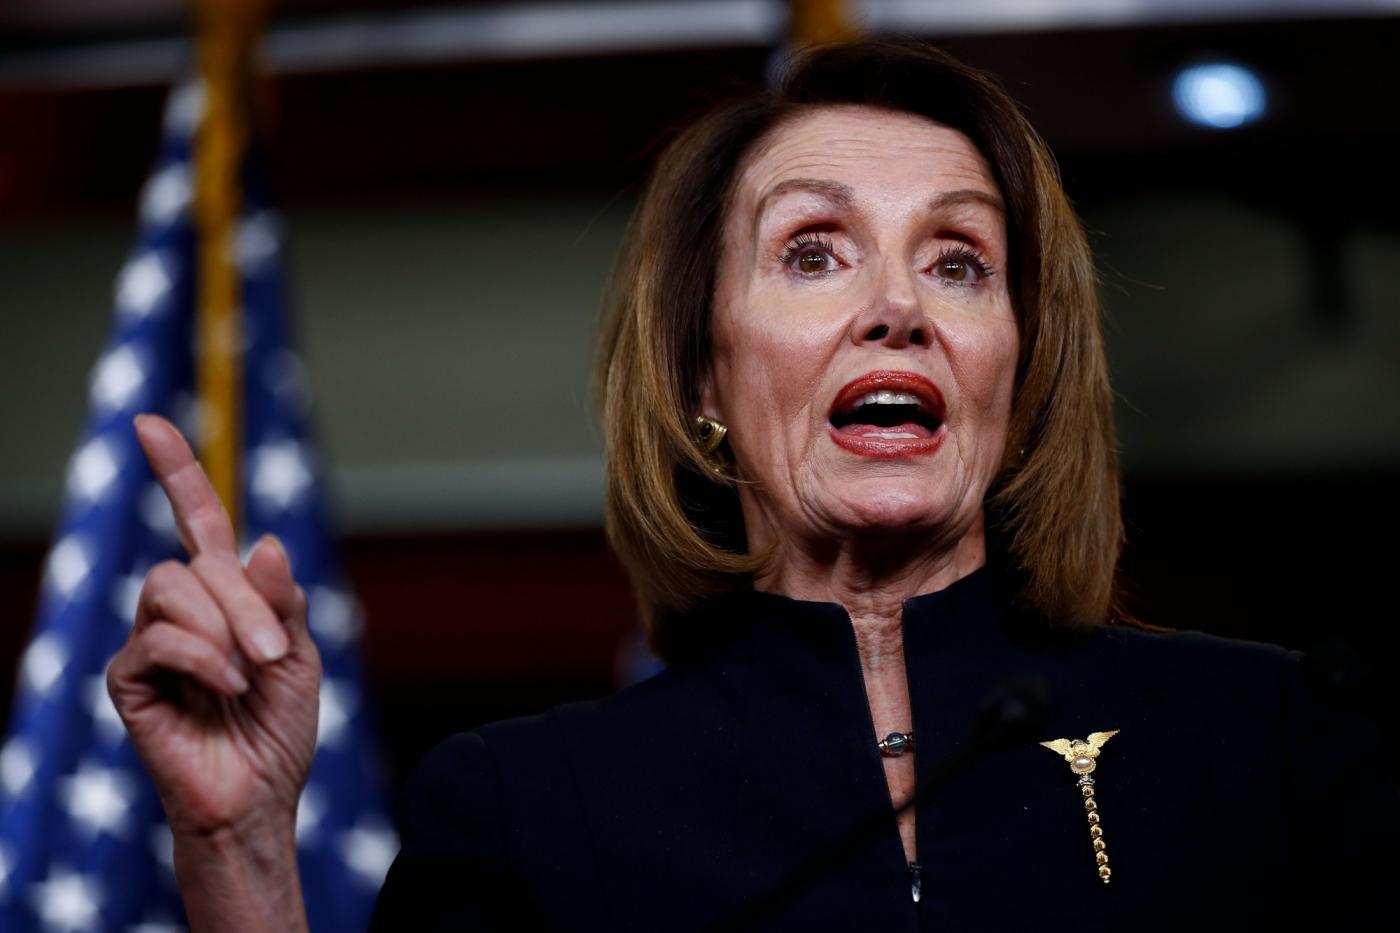 WASHINGTON, Feb. 14, 2019 (Xinhua) -- U.S. House Speaker Nancy Pelosi speaks during a press conference on Capitol Hill in Washington D.C., the United States, on Feb. 14, 2019. U.S. President Donald Trump is prepared to sign a bipartisan bill on spending and border security to avert another government shutdown, but also declare a national emergency to obtain funds for his long-promised border wall, the White House said Thursday. Nancy Pelosi, the top Democrat in the House, said her party is "reviewing our options" in responding to the anticipated emergency declaration. (Xinhua/Ting Shen/IANS) by .